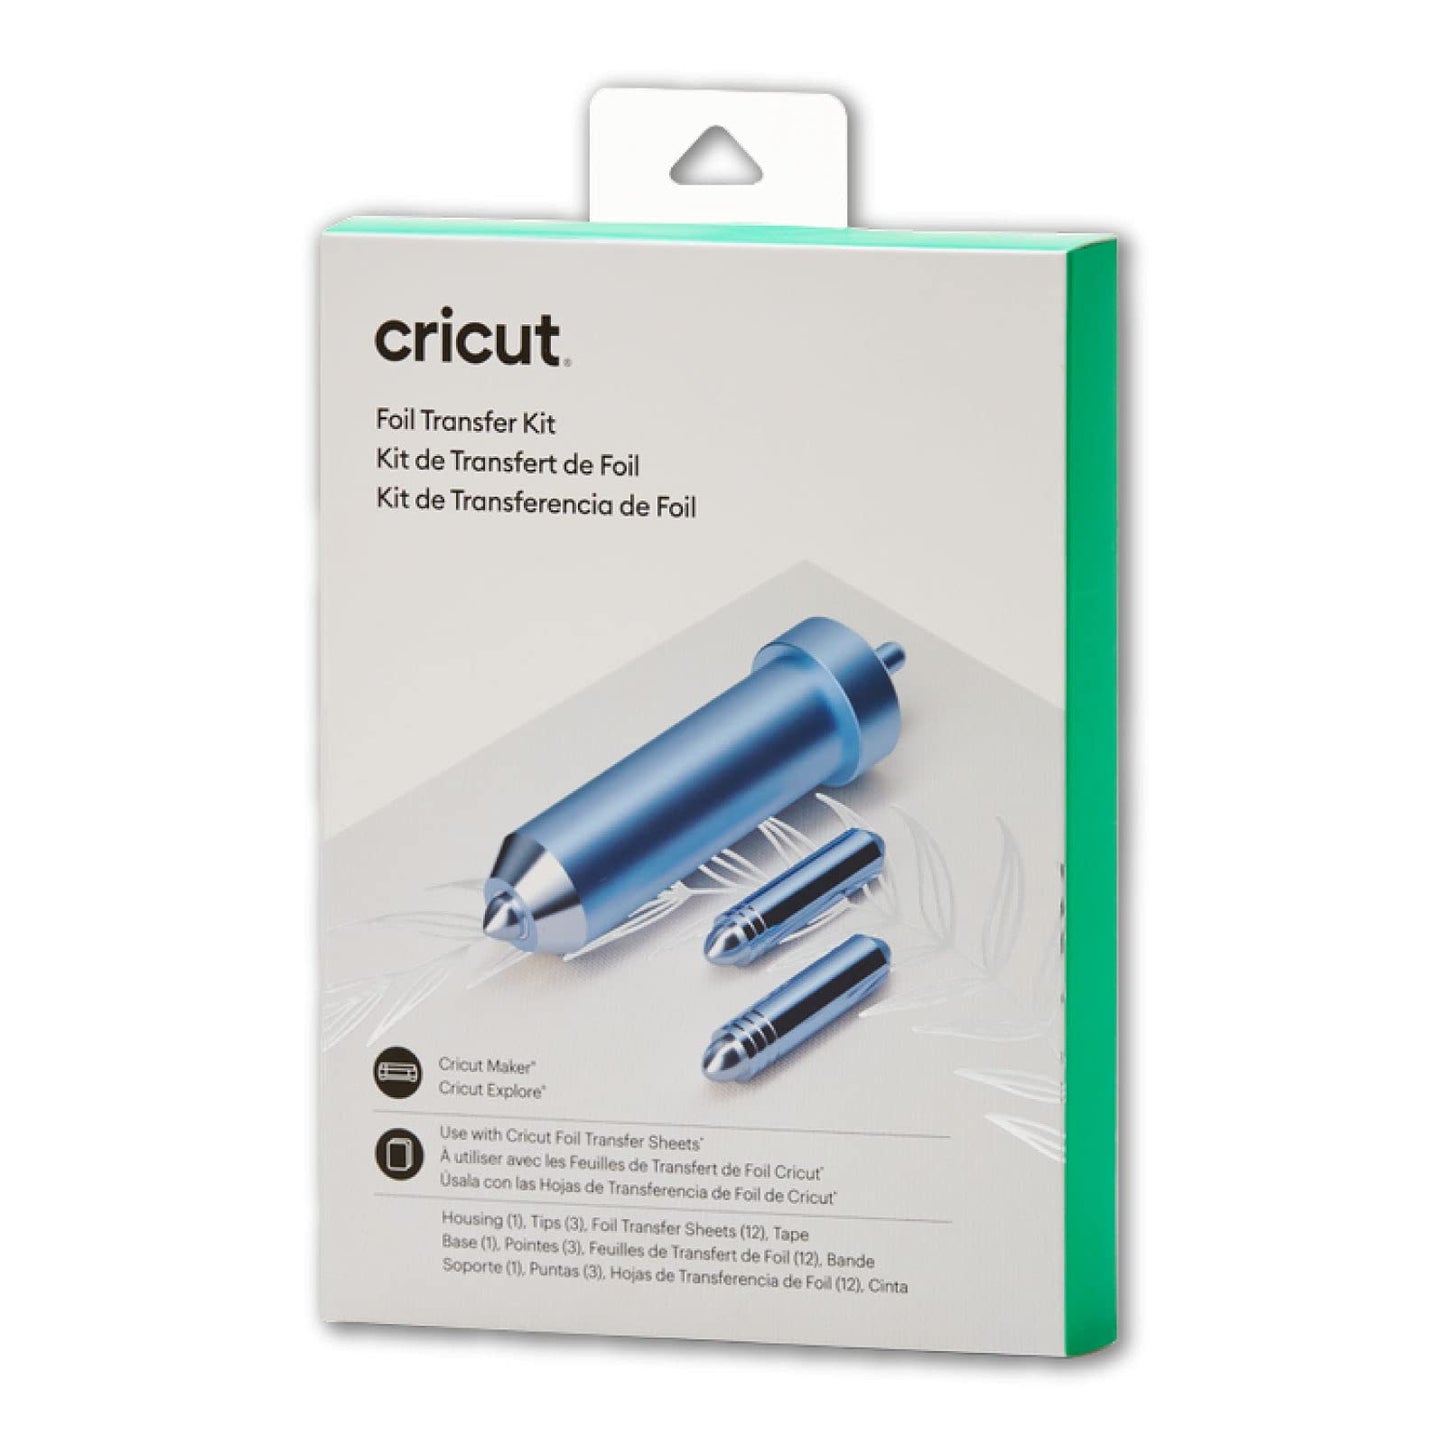 Cricut Foil Transfer Kit, Includes 12 Foil Transfer Sheets, 3 Cricut Tools in 1 with Interchangeable Tips (Fine, Medium &amp; Bold), Tool Housing &amp; Adhesive Tape, For Cricut Maker &amp; Explore Machines